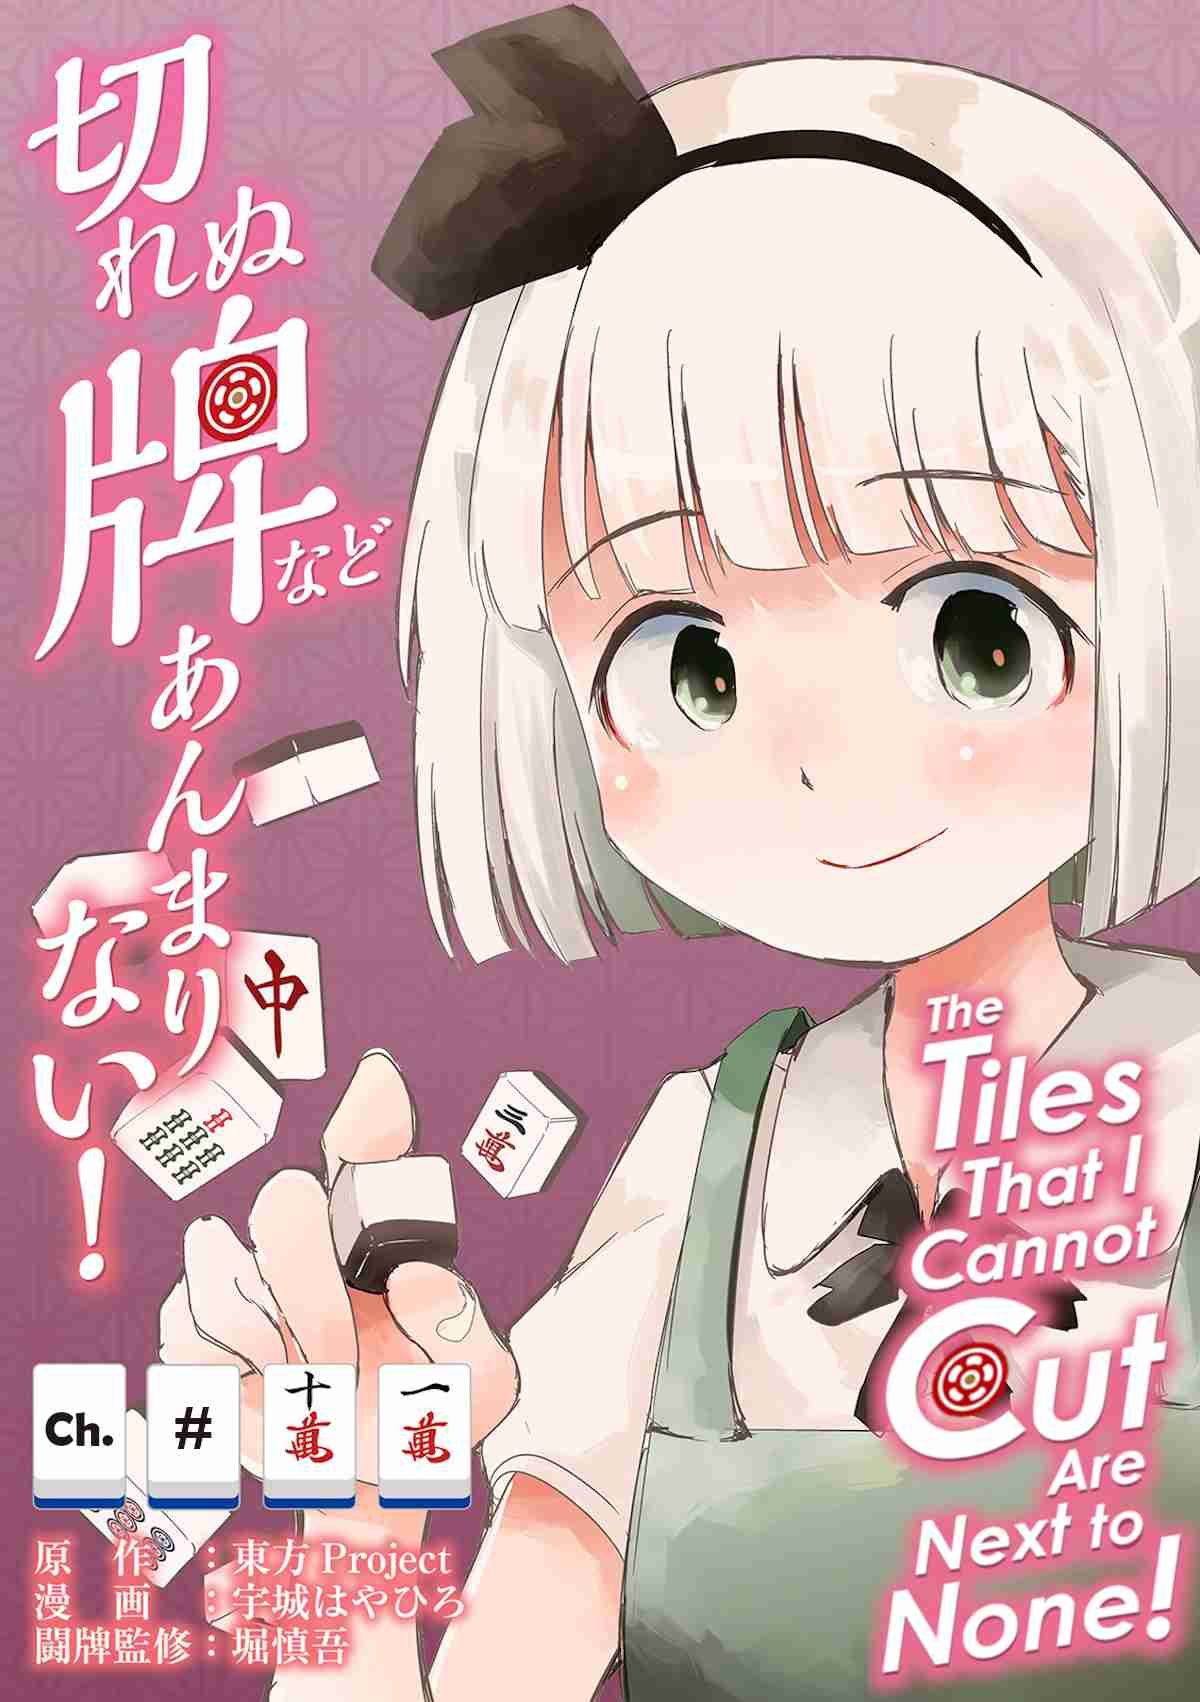 Touhou ~ The Tiles That I Cannot Cut Are Next to None! (Doujinshi) 11